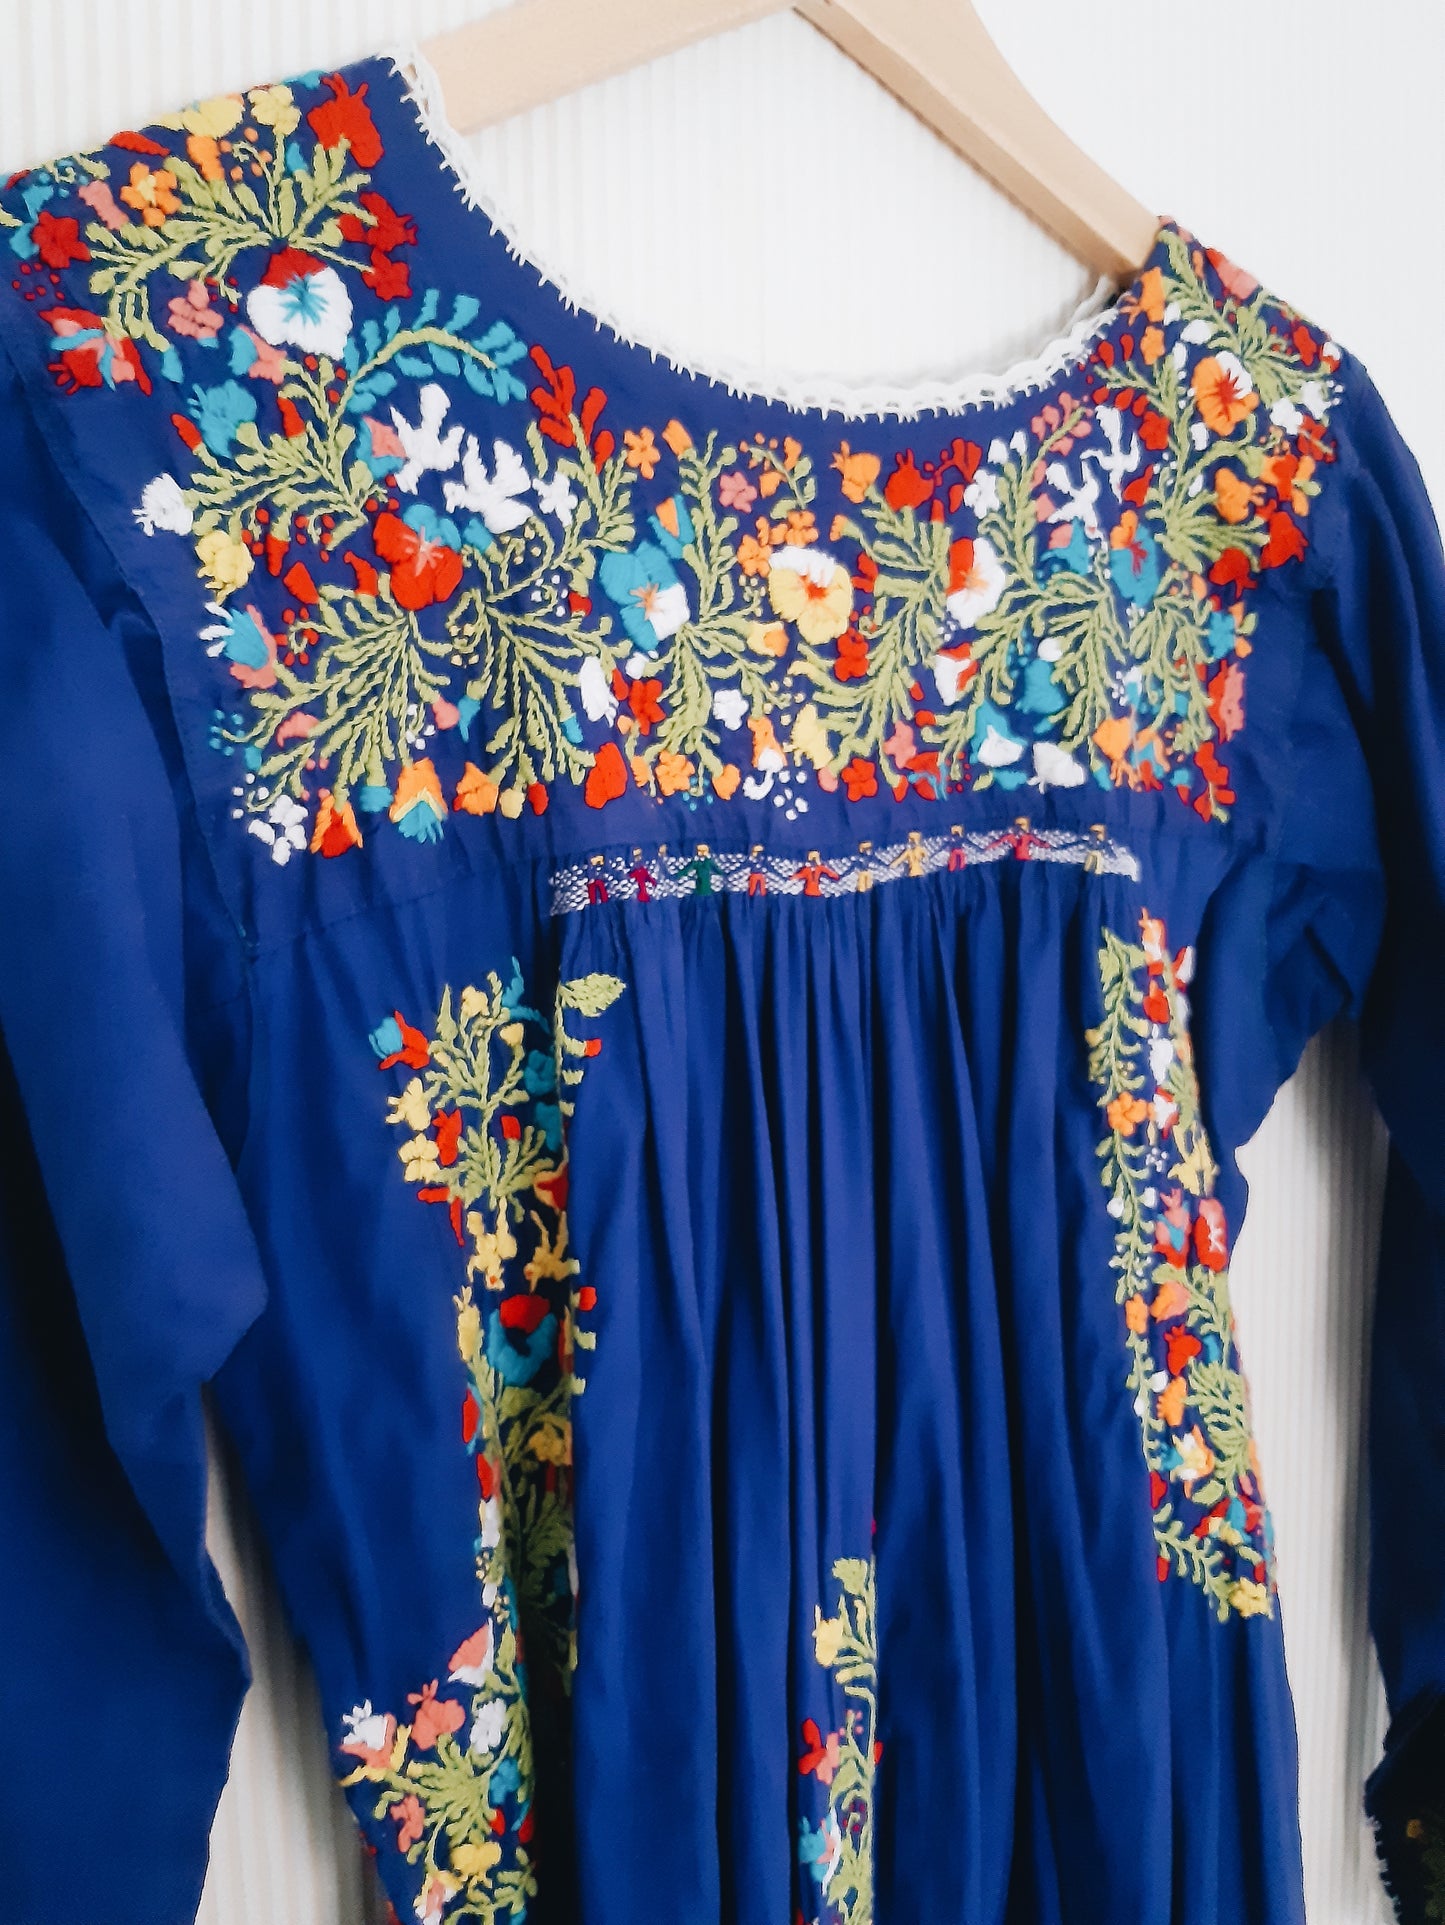 NEW IN! Embroidery dress